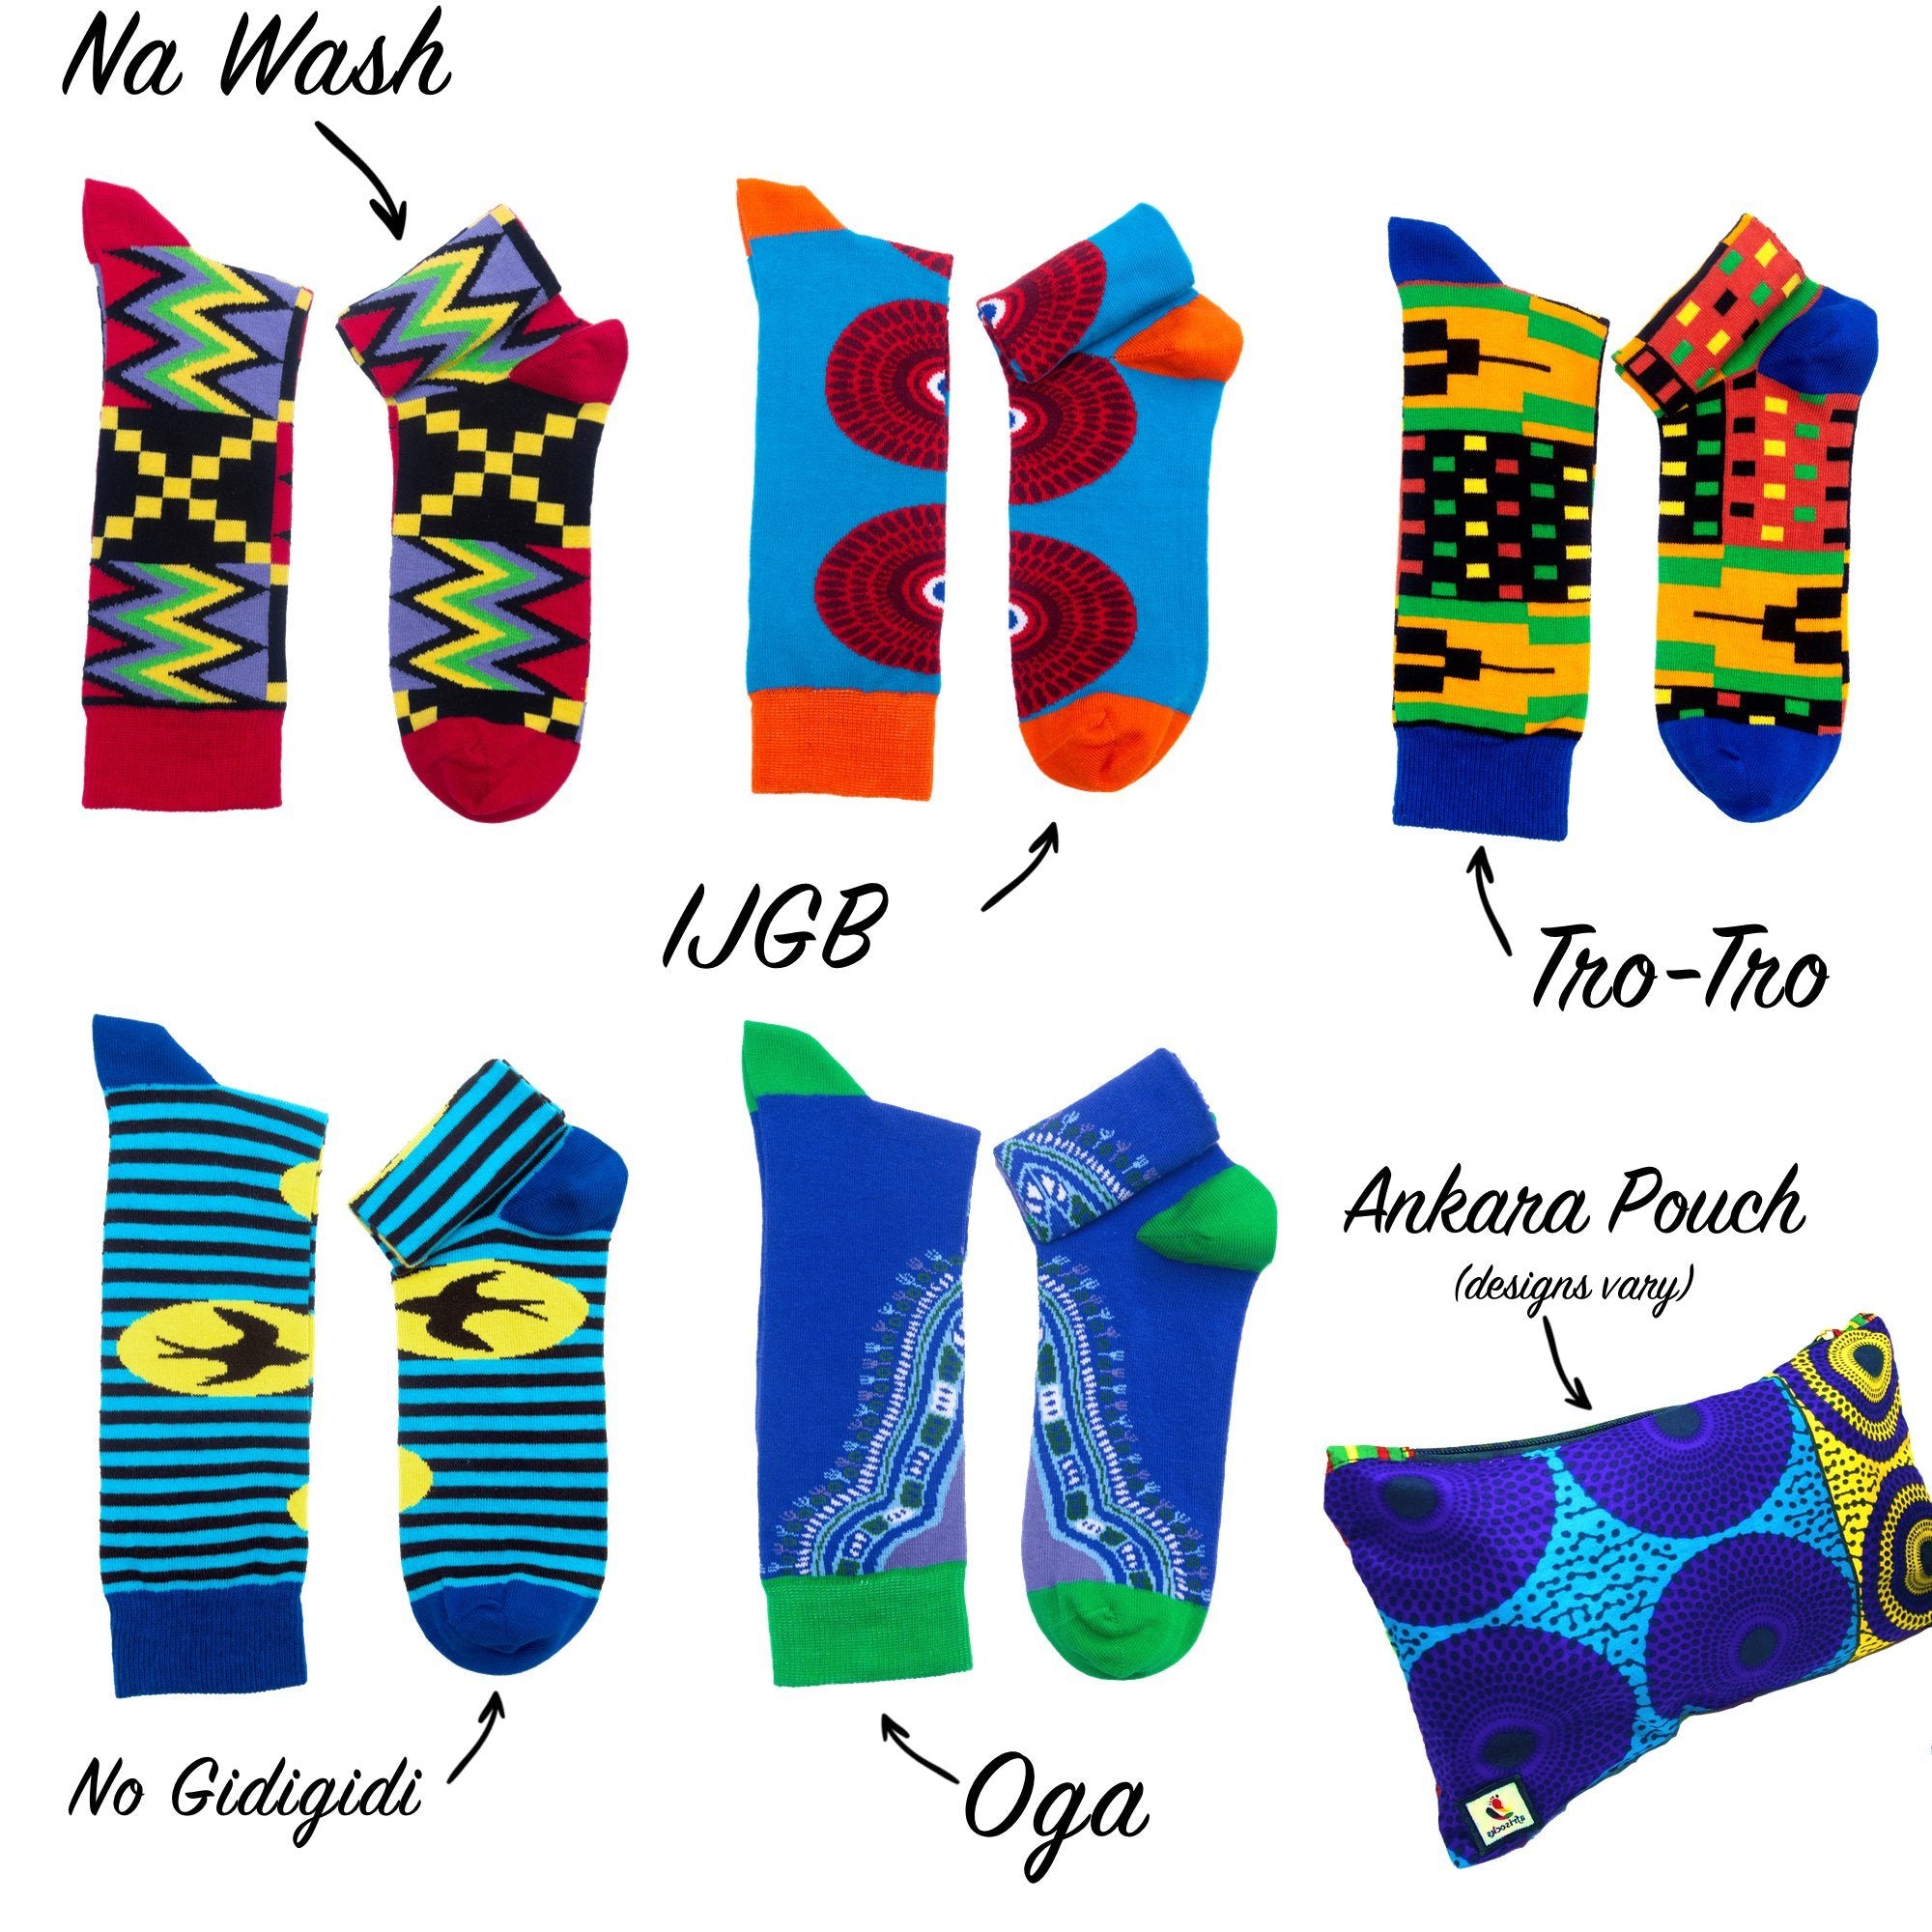 The New Afrisocks Collection